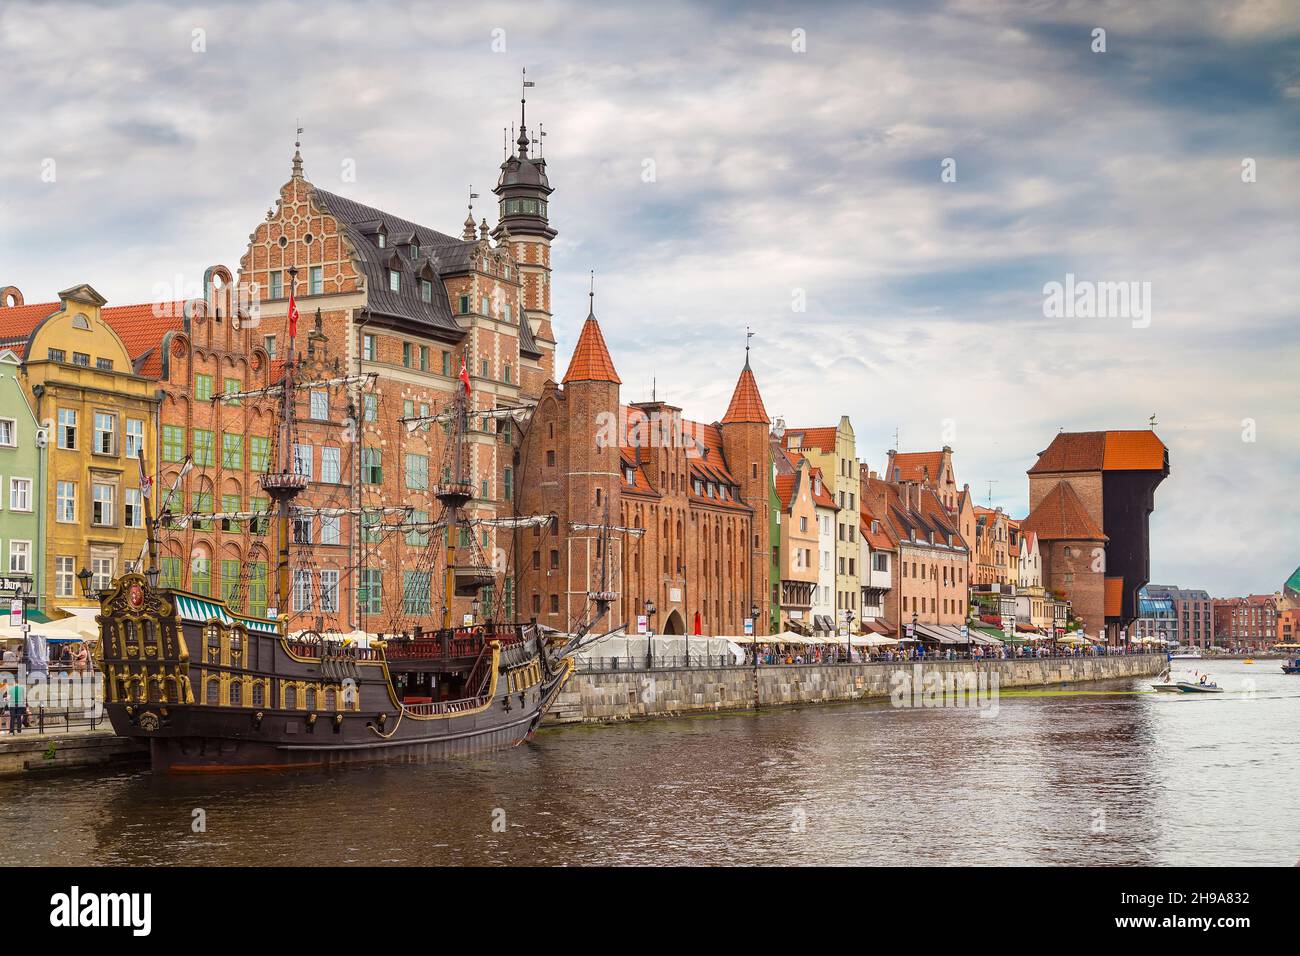 GDANSK, POLAND - AUGUST 02, 2017: Embankment of the river with pleasure boats and yachts, an excursion pirate ship and the construction of the XV cent Stock Photo